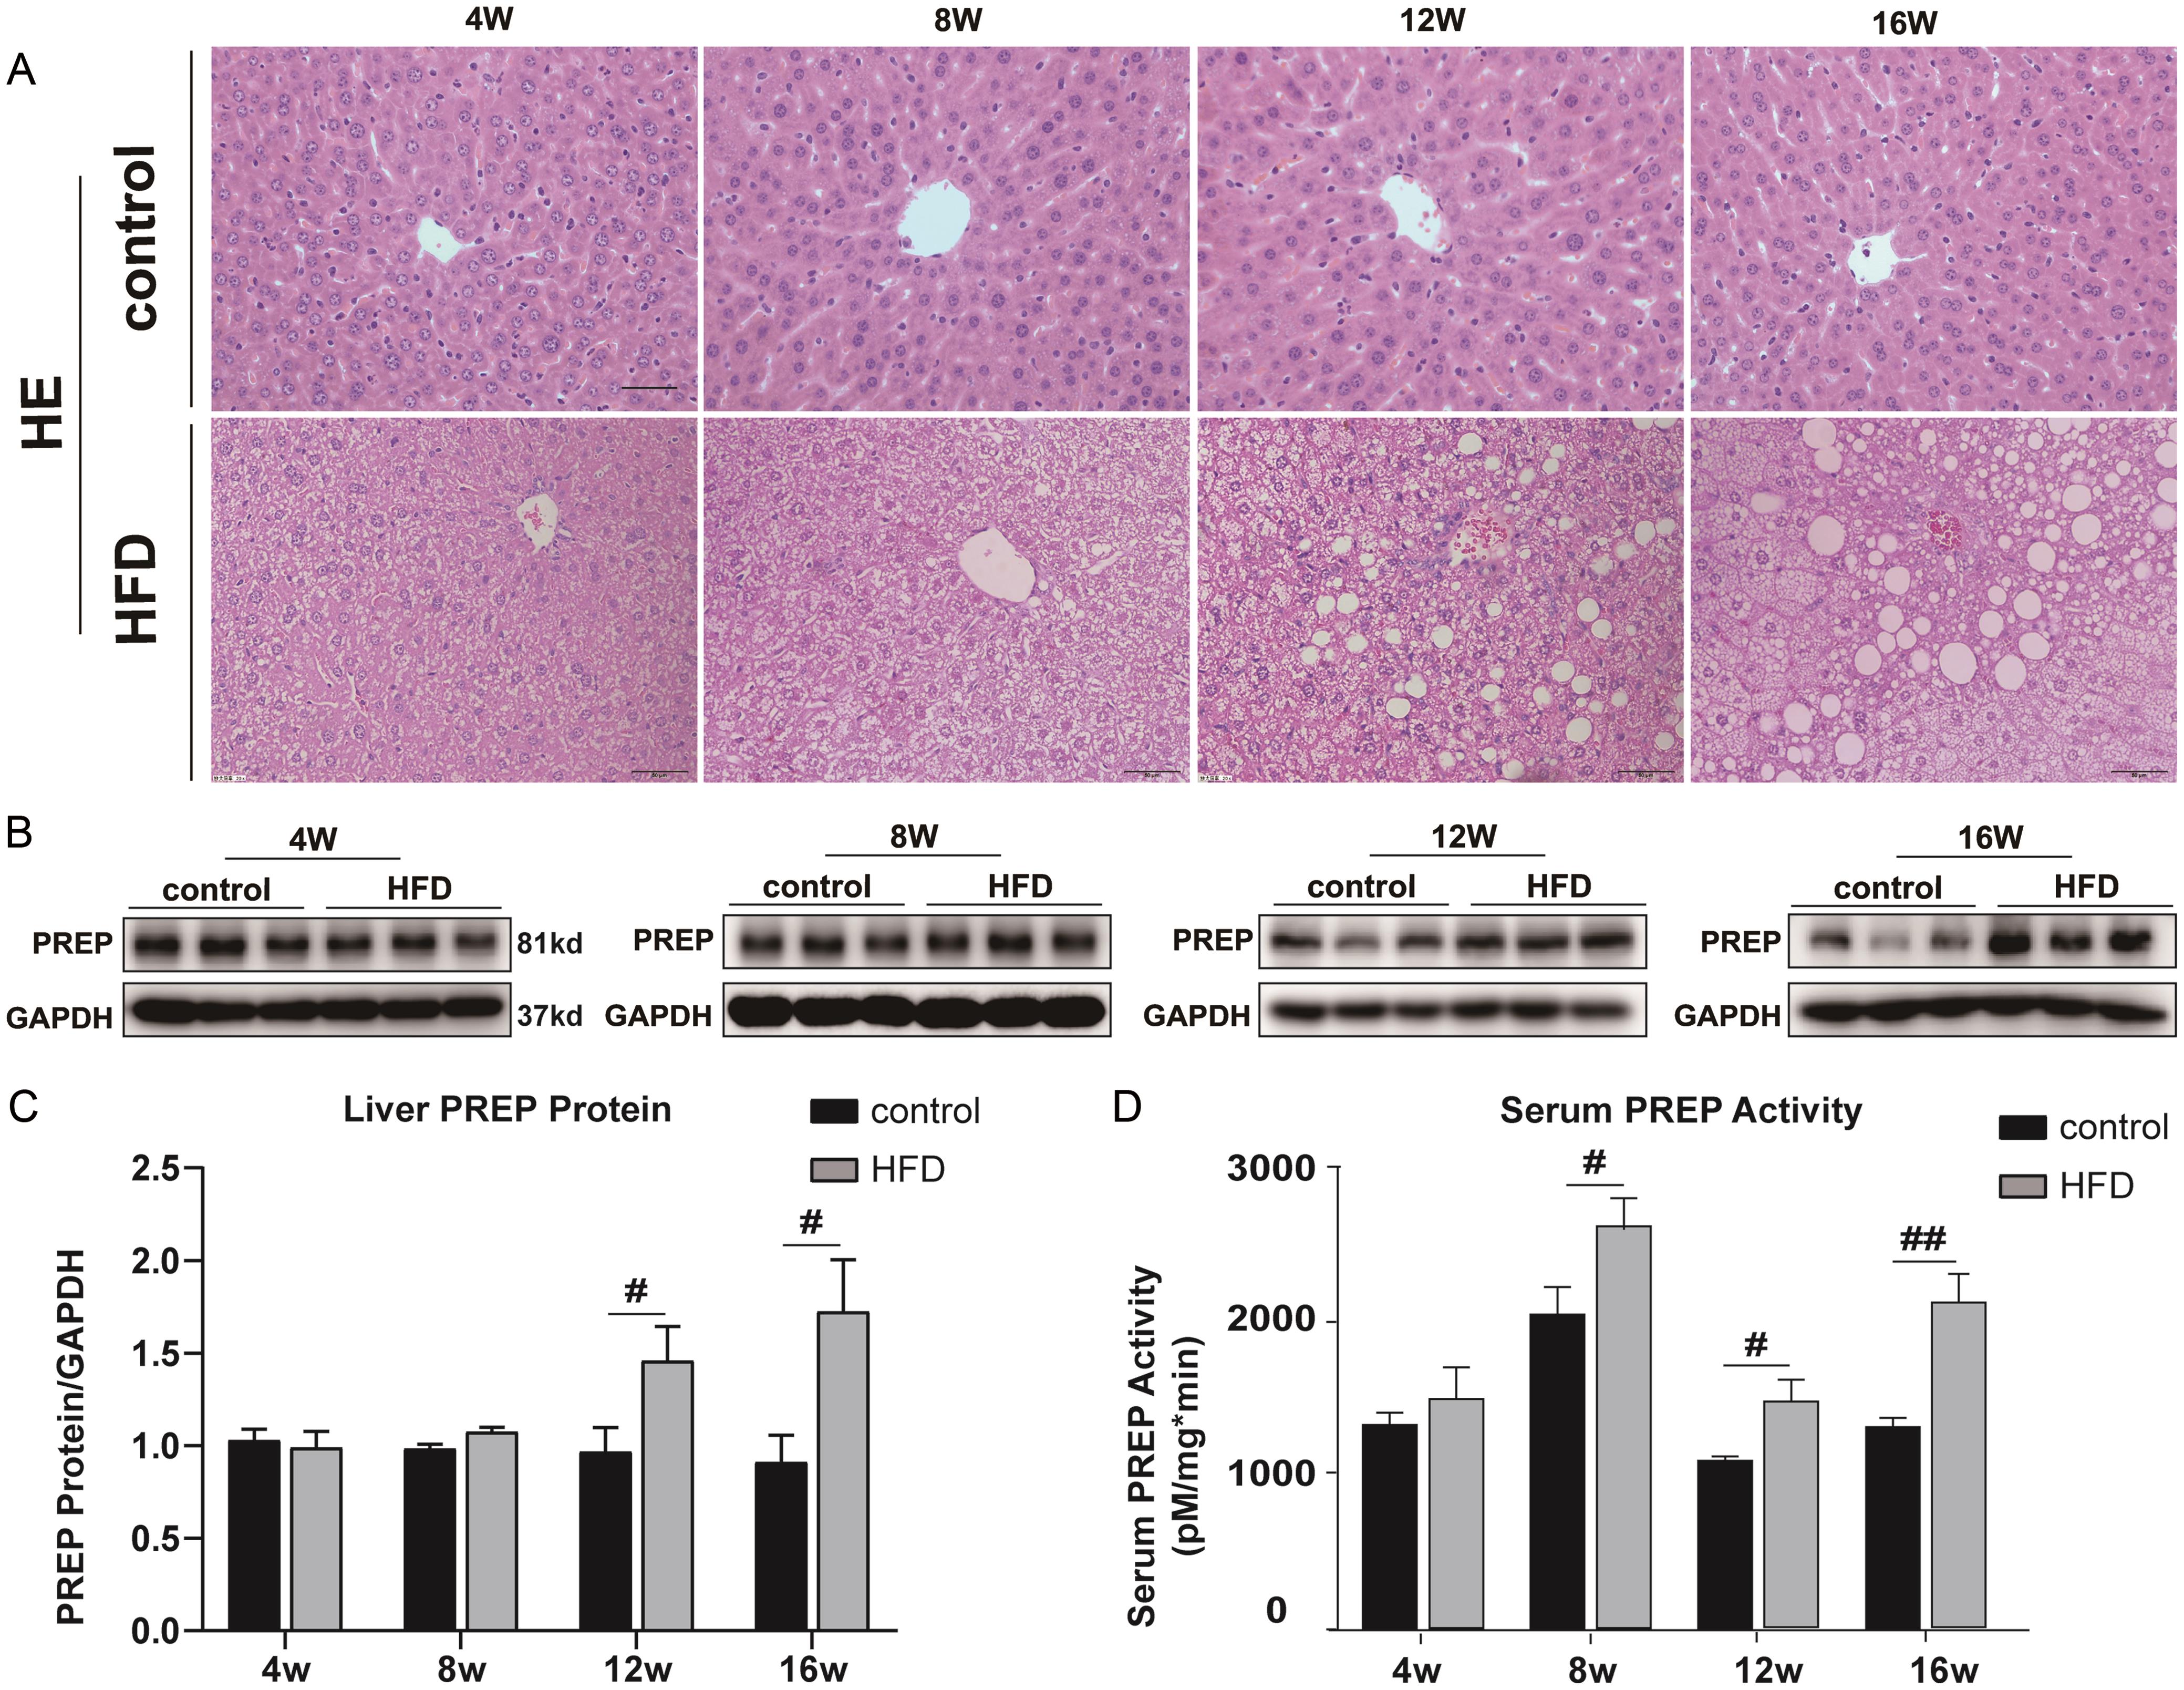 Activity and protein expression of prolyl endopeptidase (PREP) was increased during metabolic dysfunction-associated fatty liver disease (MAFLD) development.